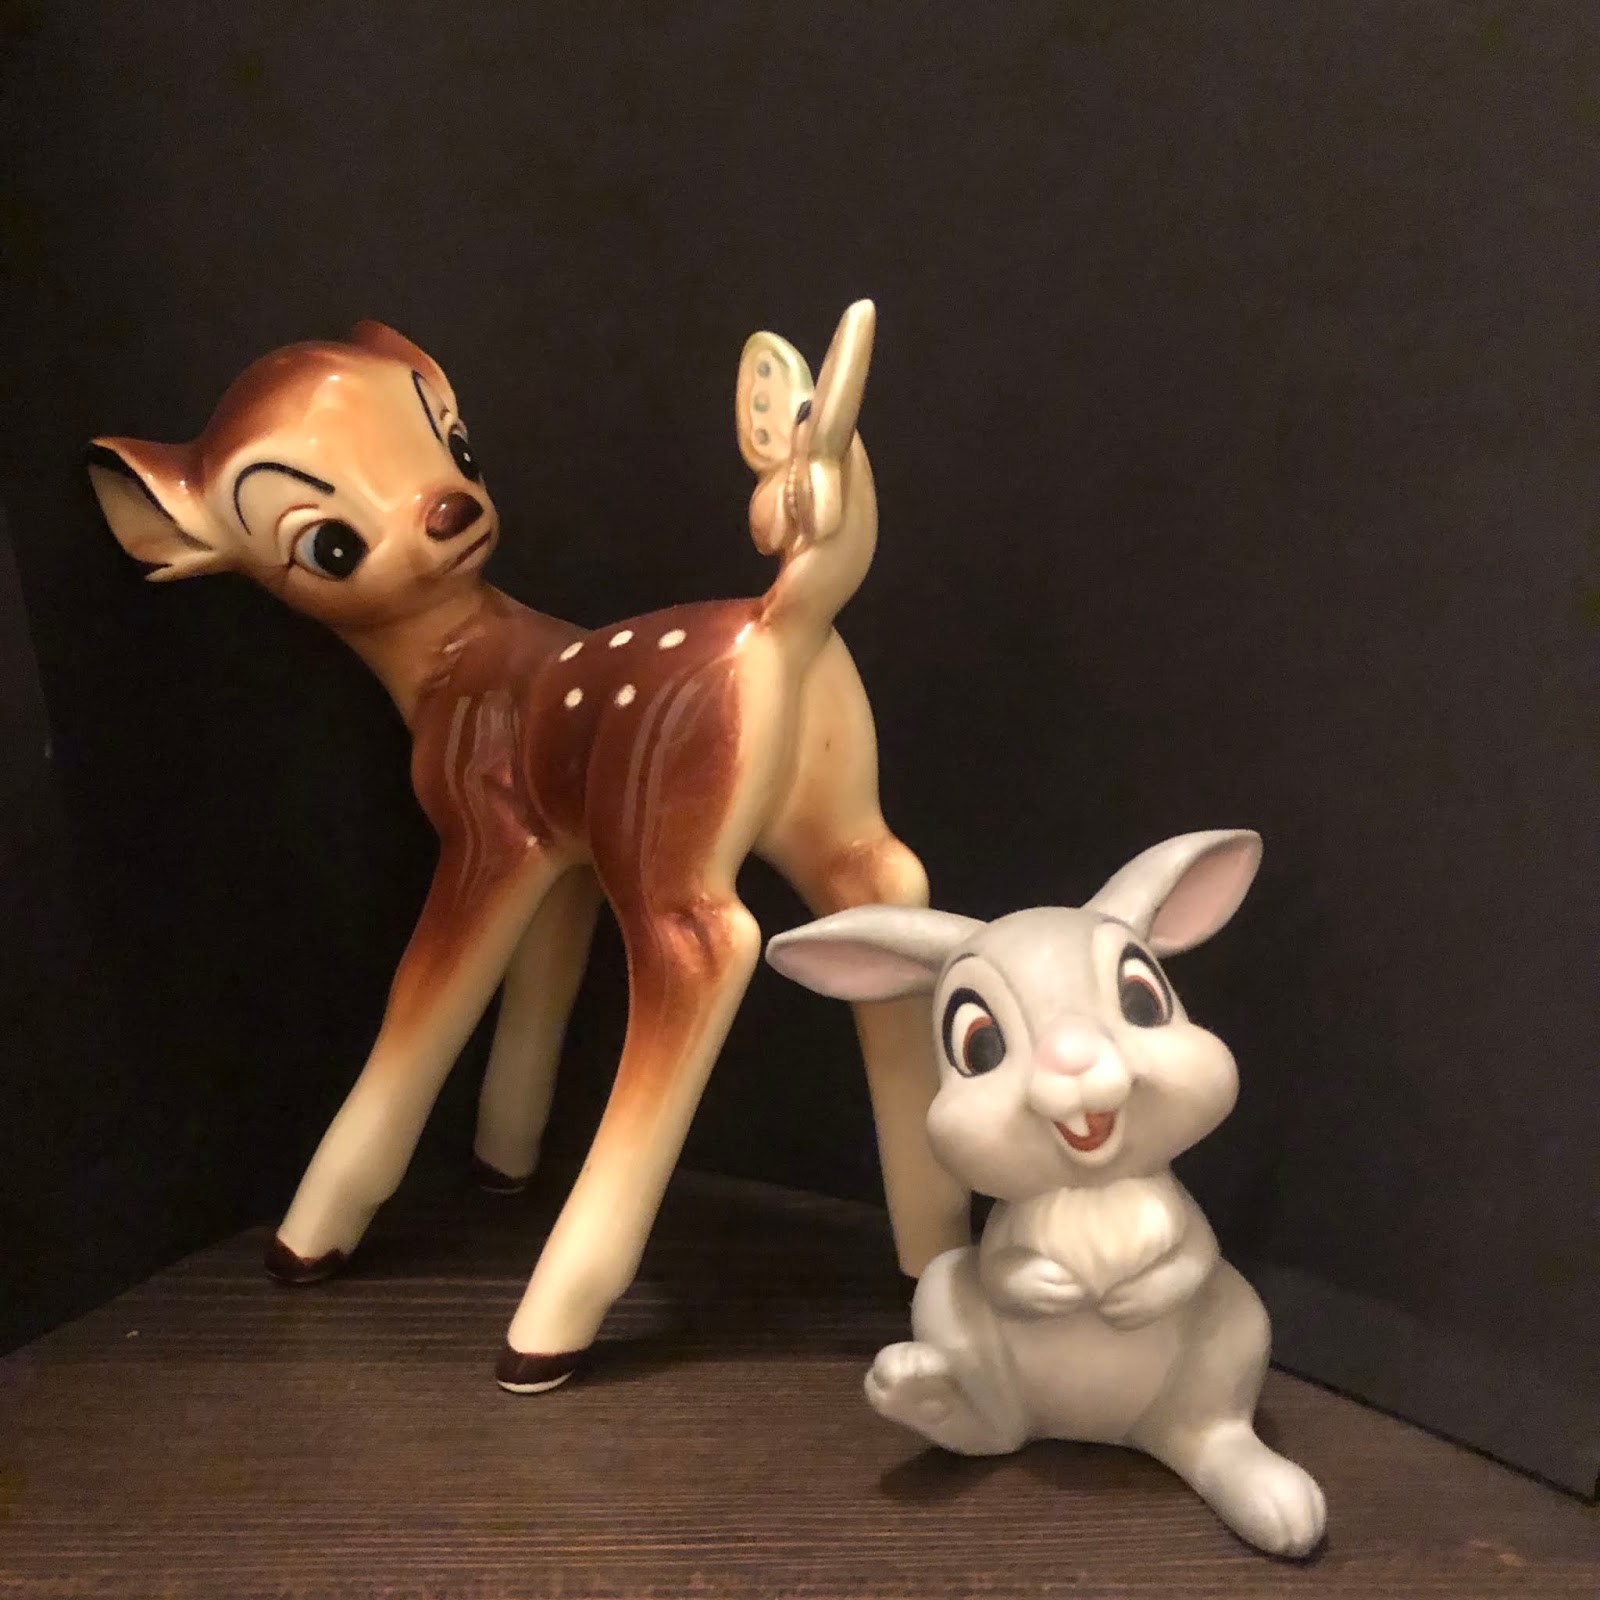 10 facts about Walt Disney's 'Bambi